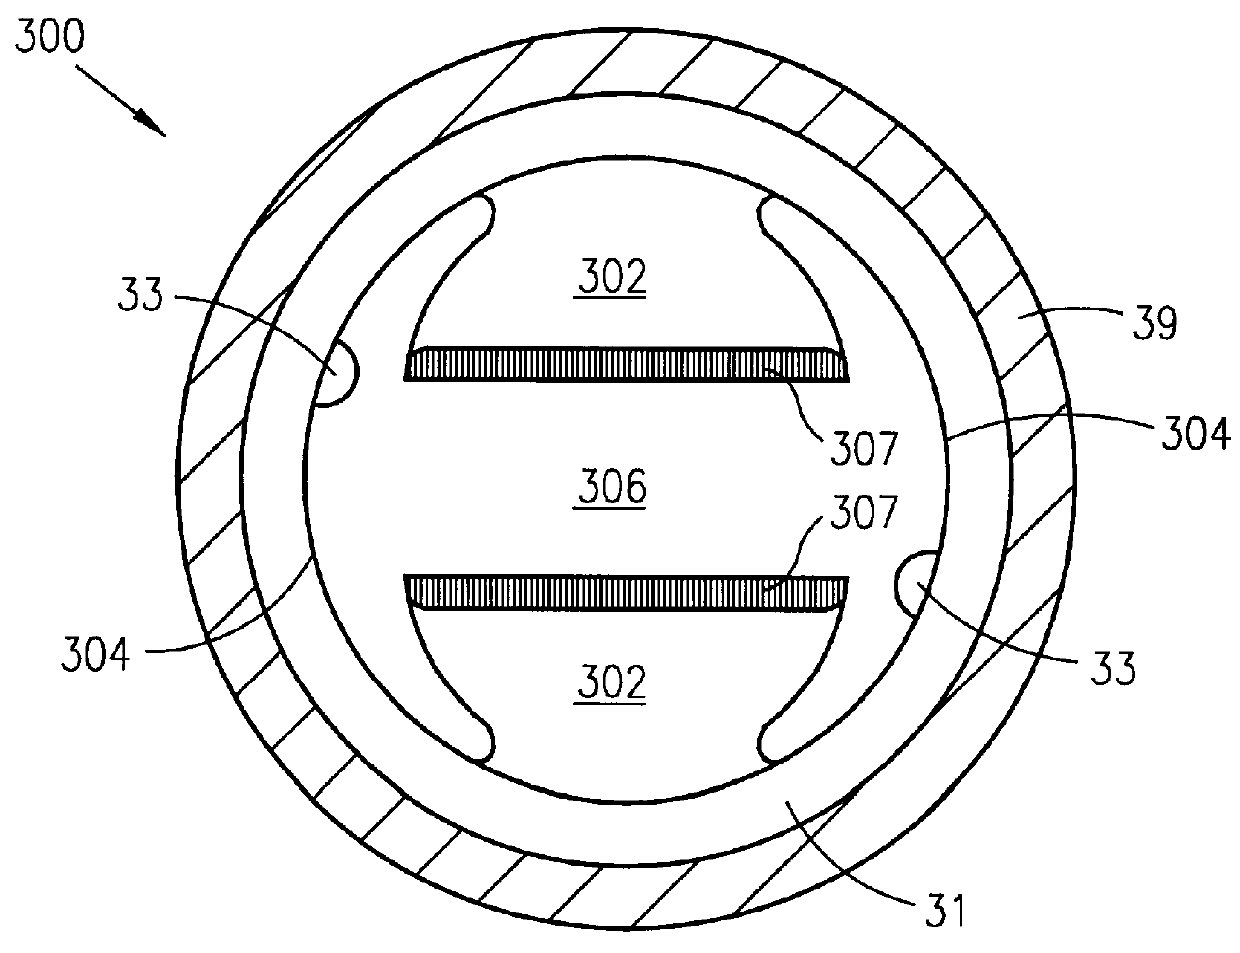 Method of magnetizing a ring-shaped magnet